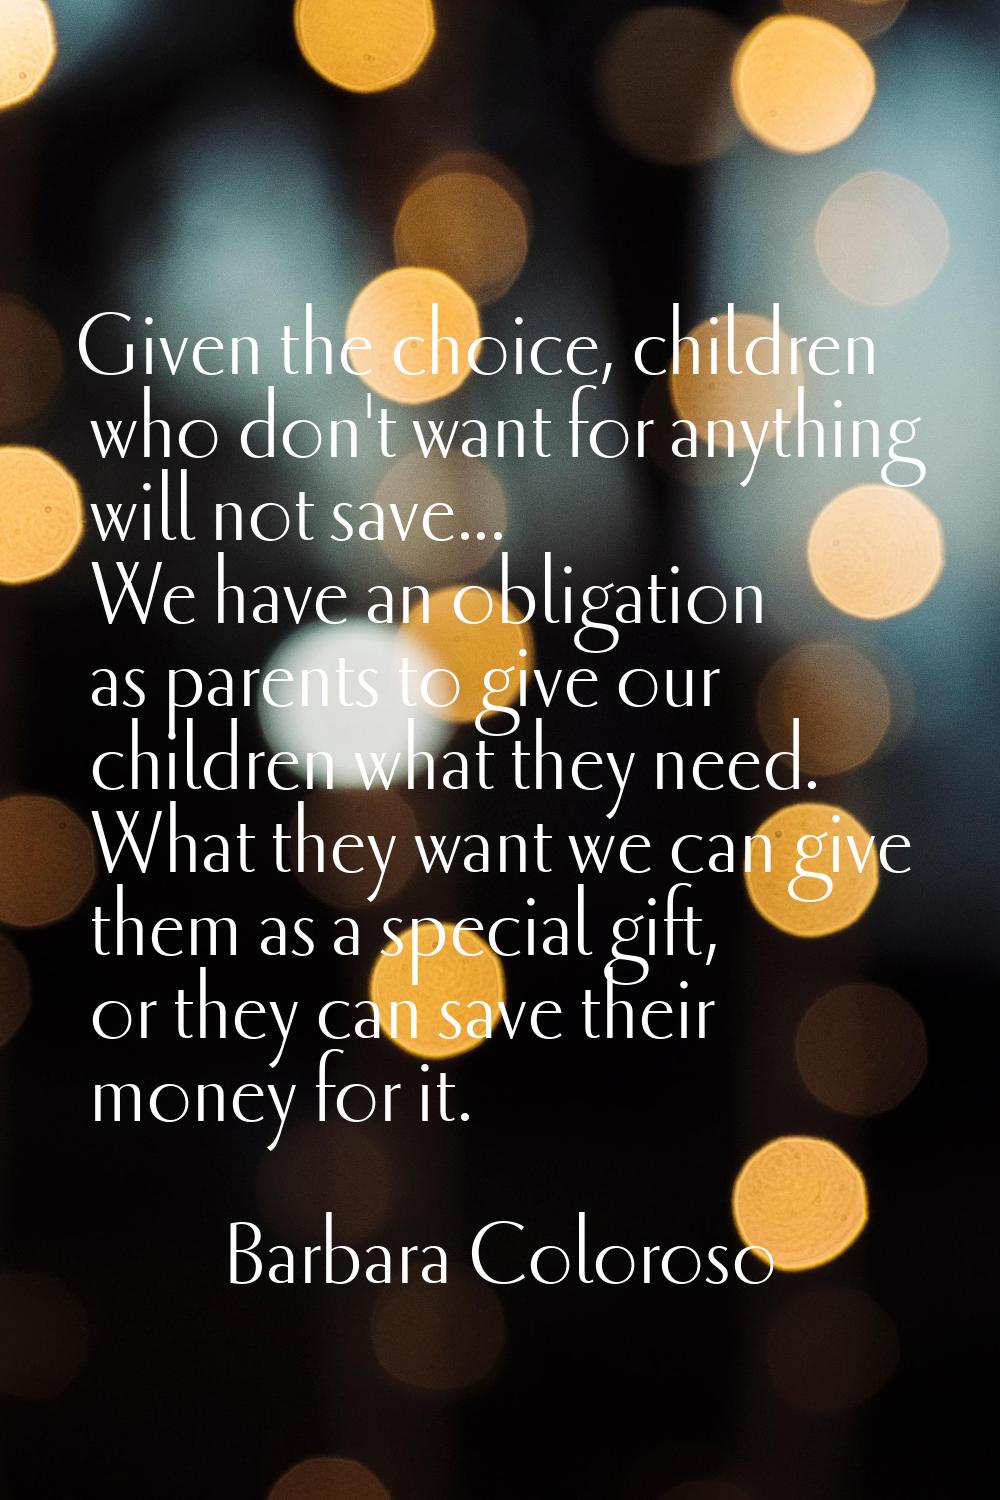 Given the choice, children who don't want for anything will not save... We have an obligation as pa